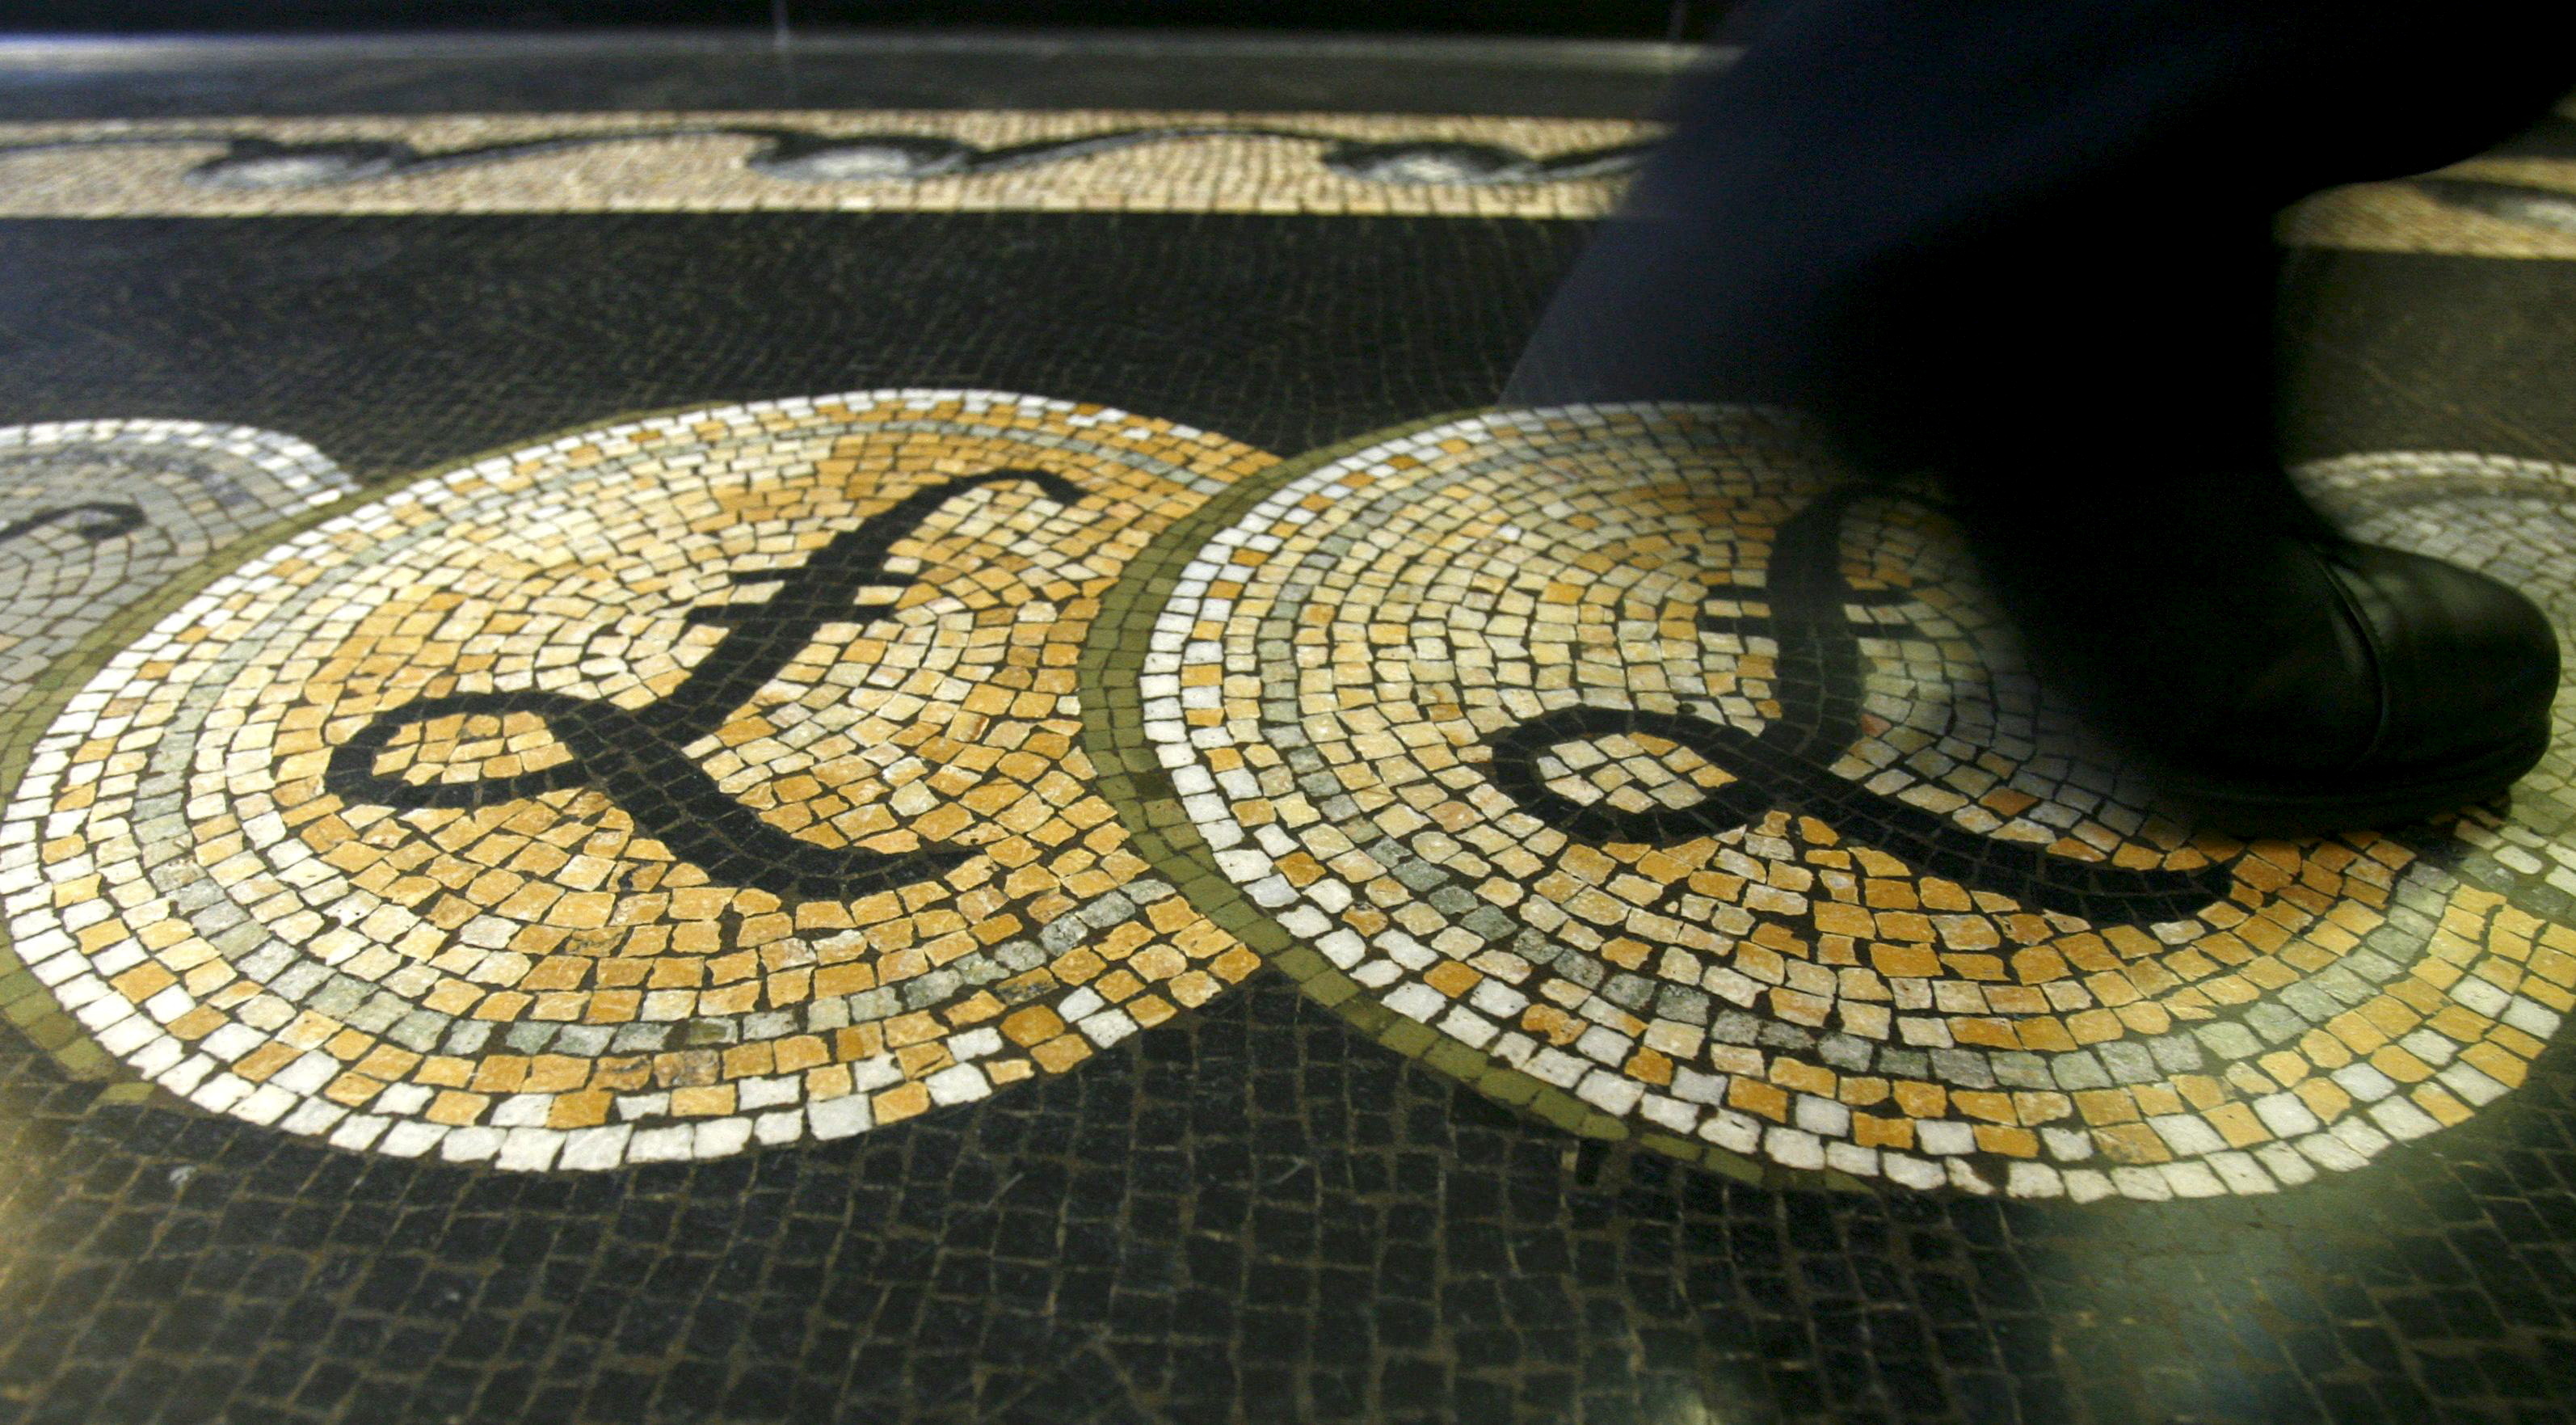 File photograph shows an employee walking over a mosaic depicting pound sterling symbols on the floor of the front hall of the Bank of England in London